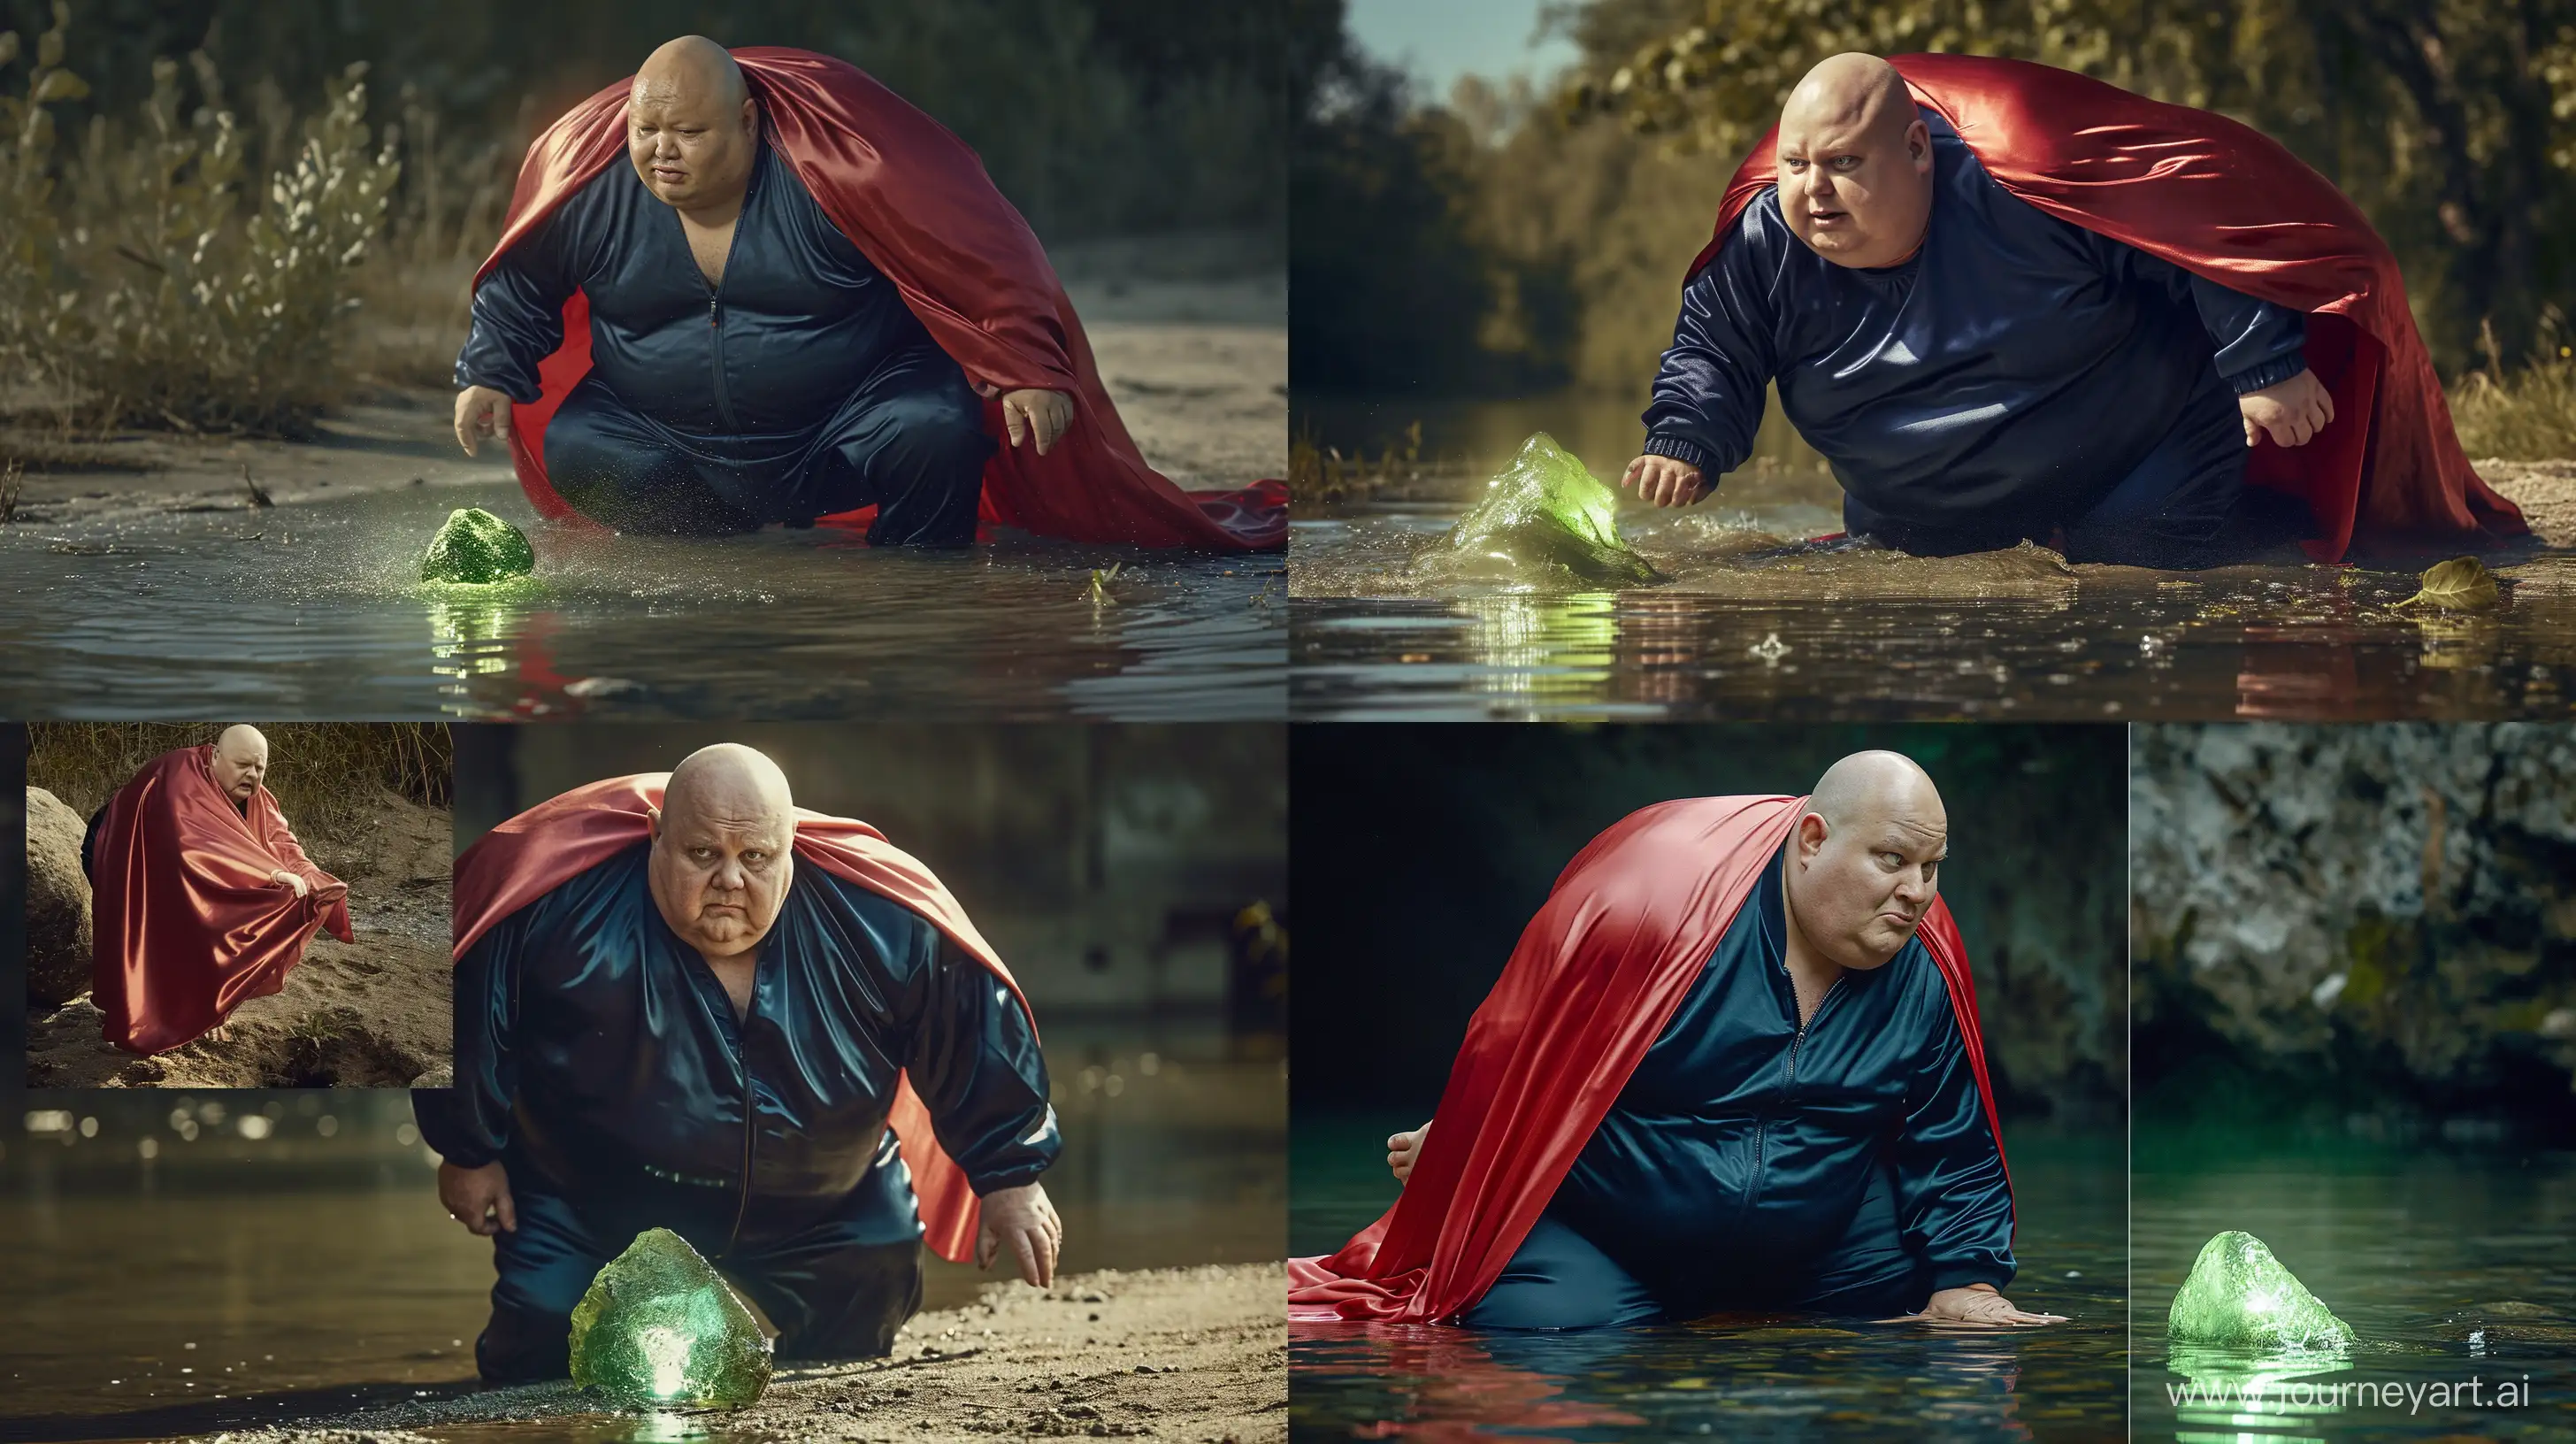 Fearful-Elderly-Man-in-Silky-Navy-Tracksuit-Confronts-Mysterious-Green-Rock-in-Water